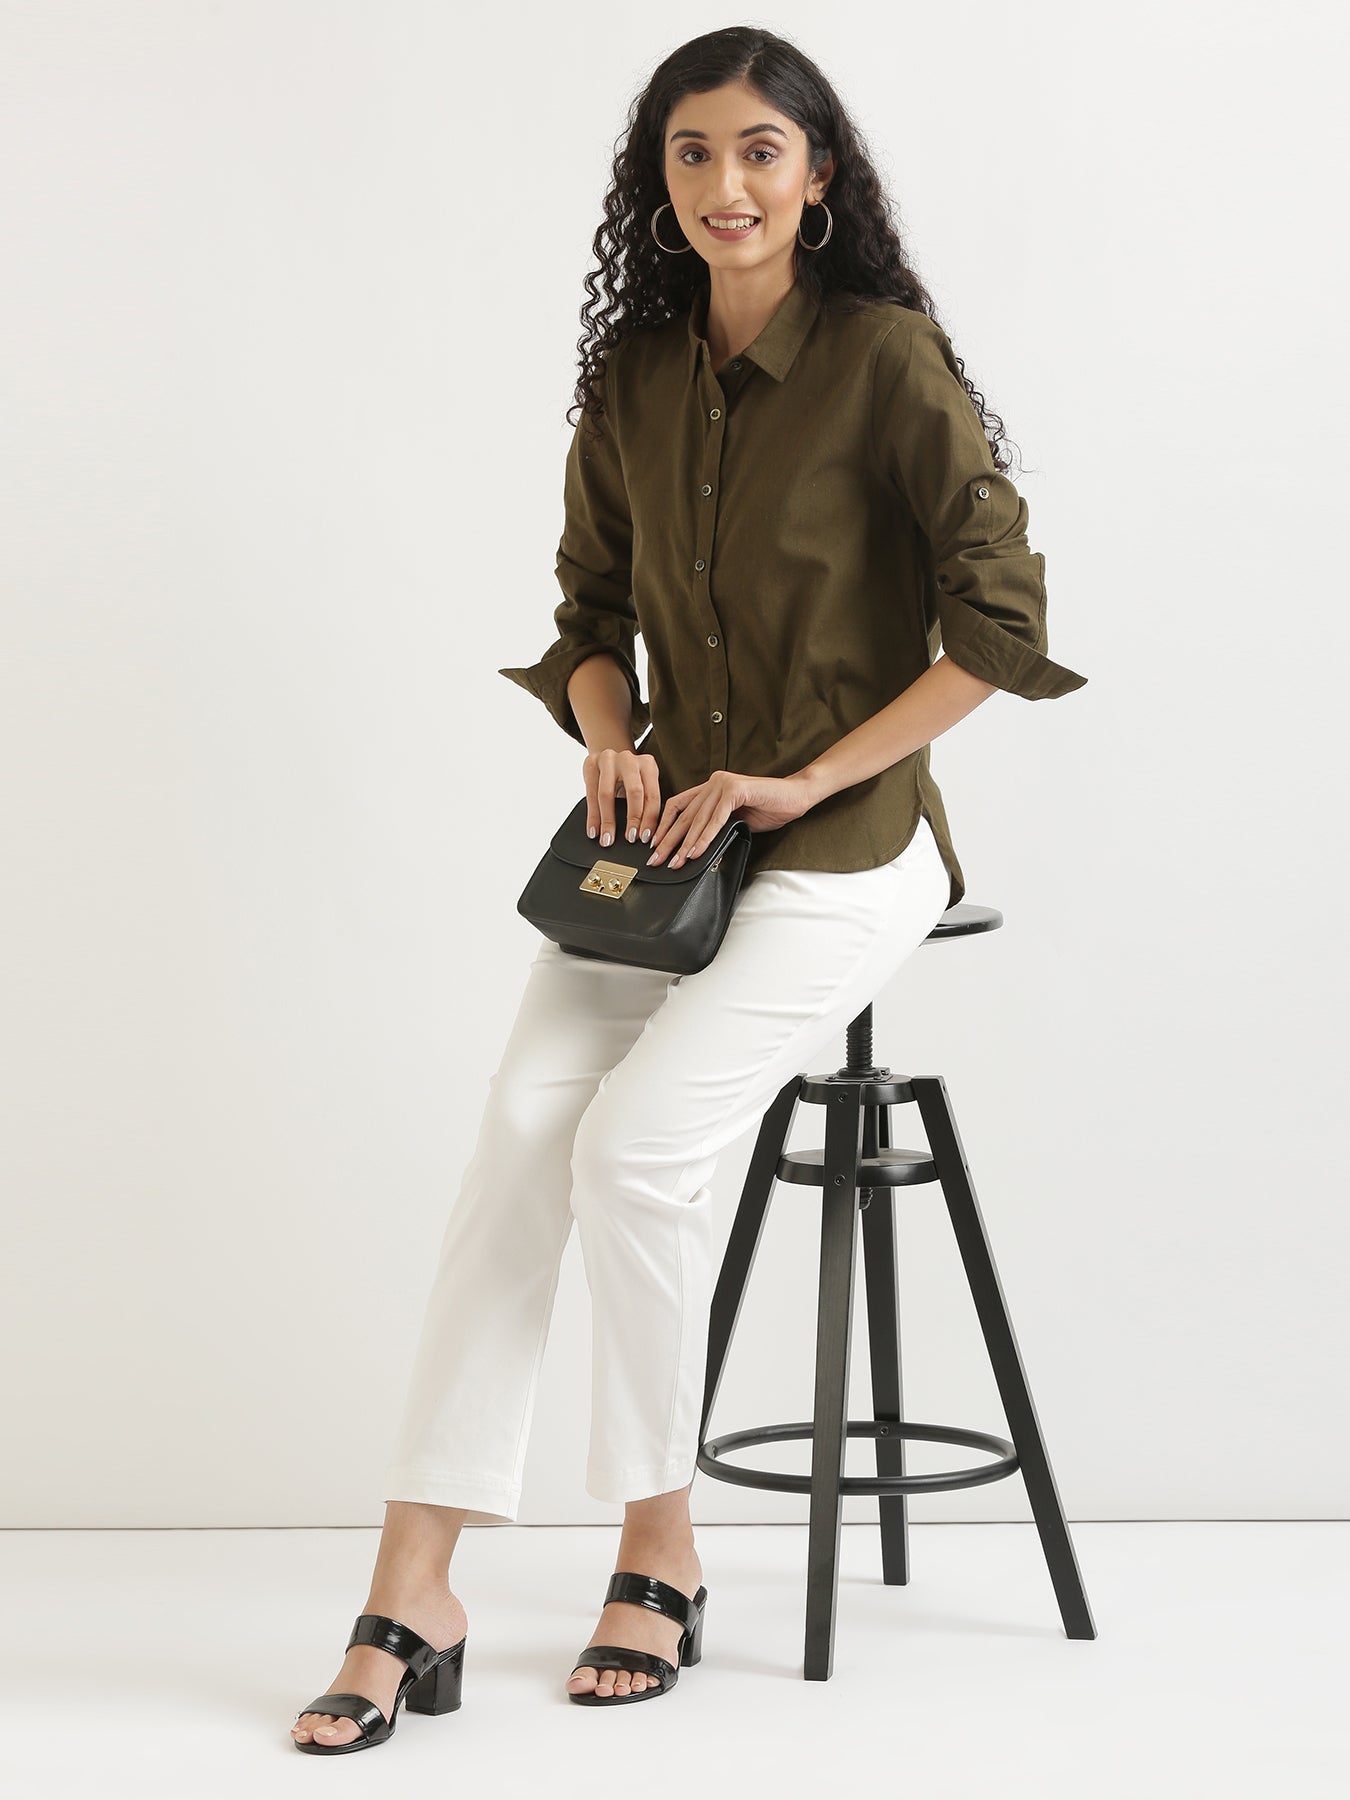 Olive Green Airy-Linen Shirt